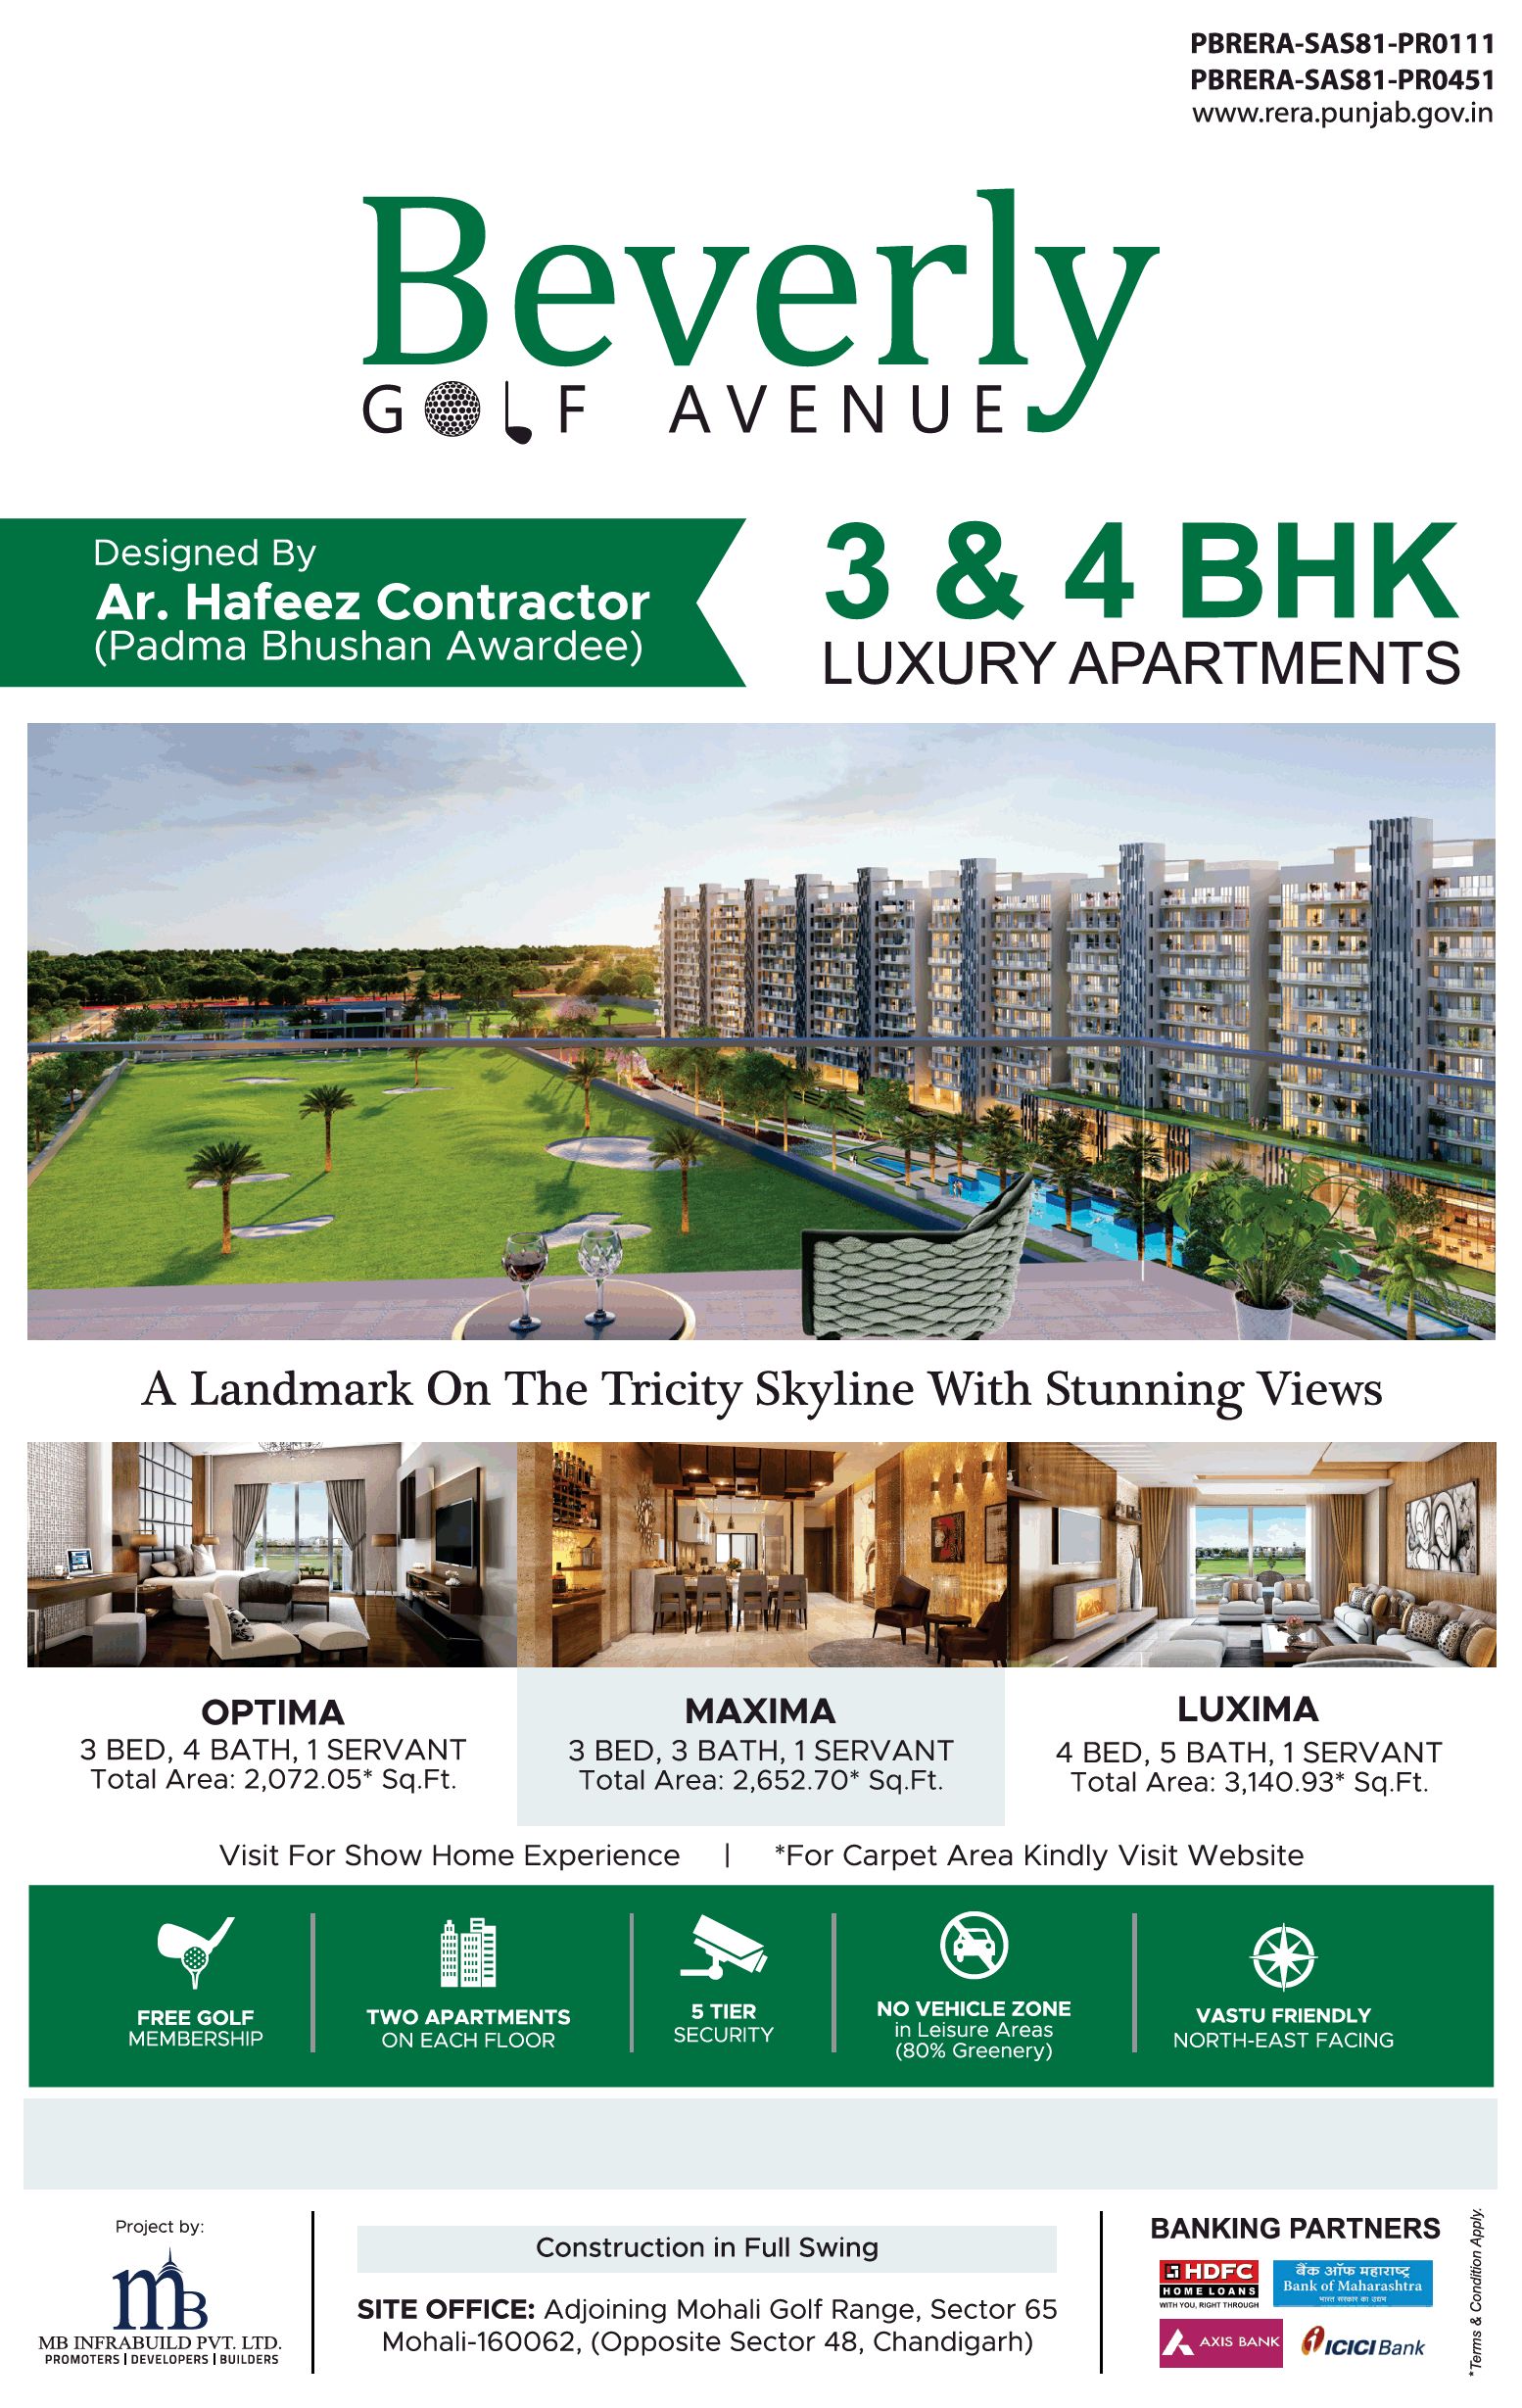 A landmark on the tricity skyline with stunning views at MB Beverly Golf Avenue, Mohali